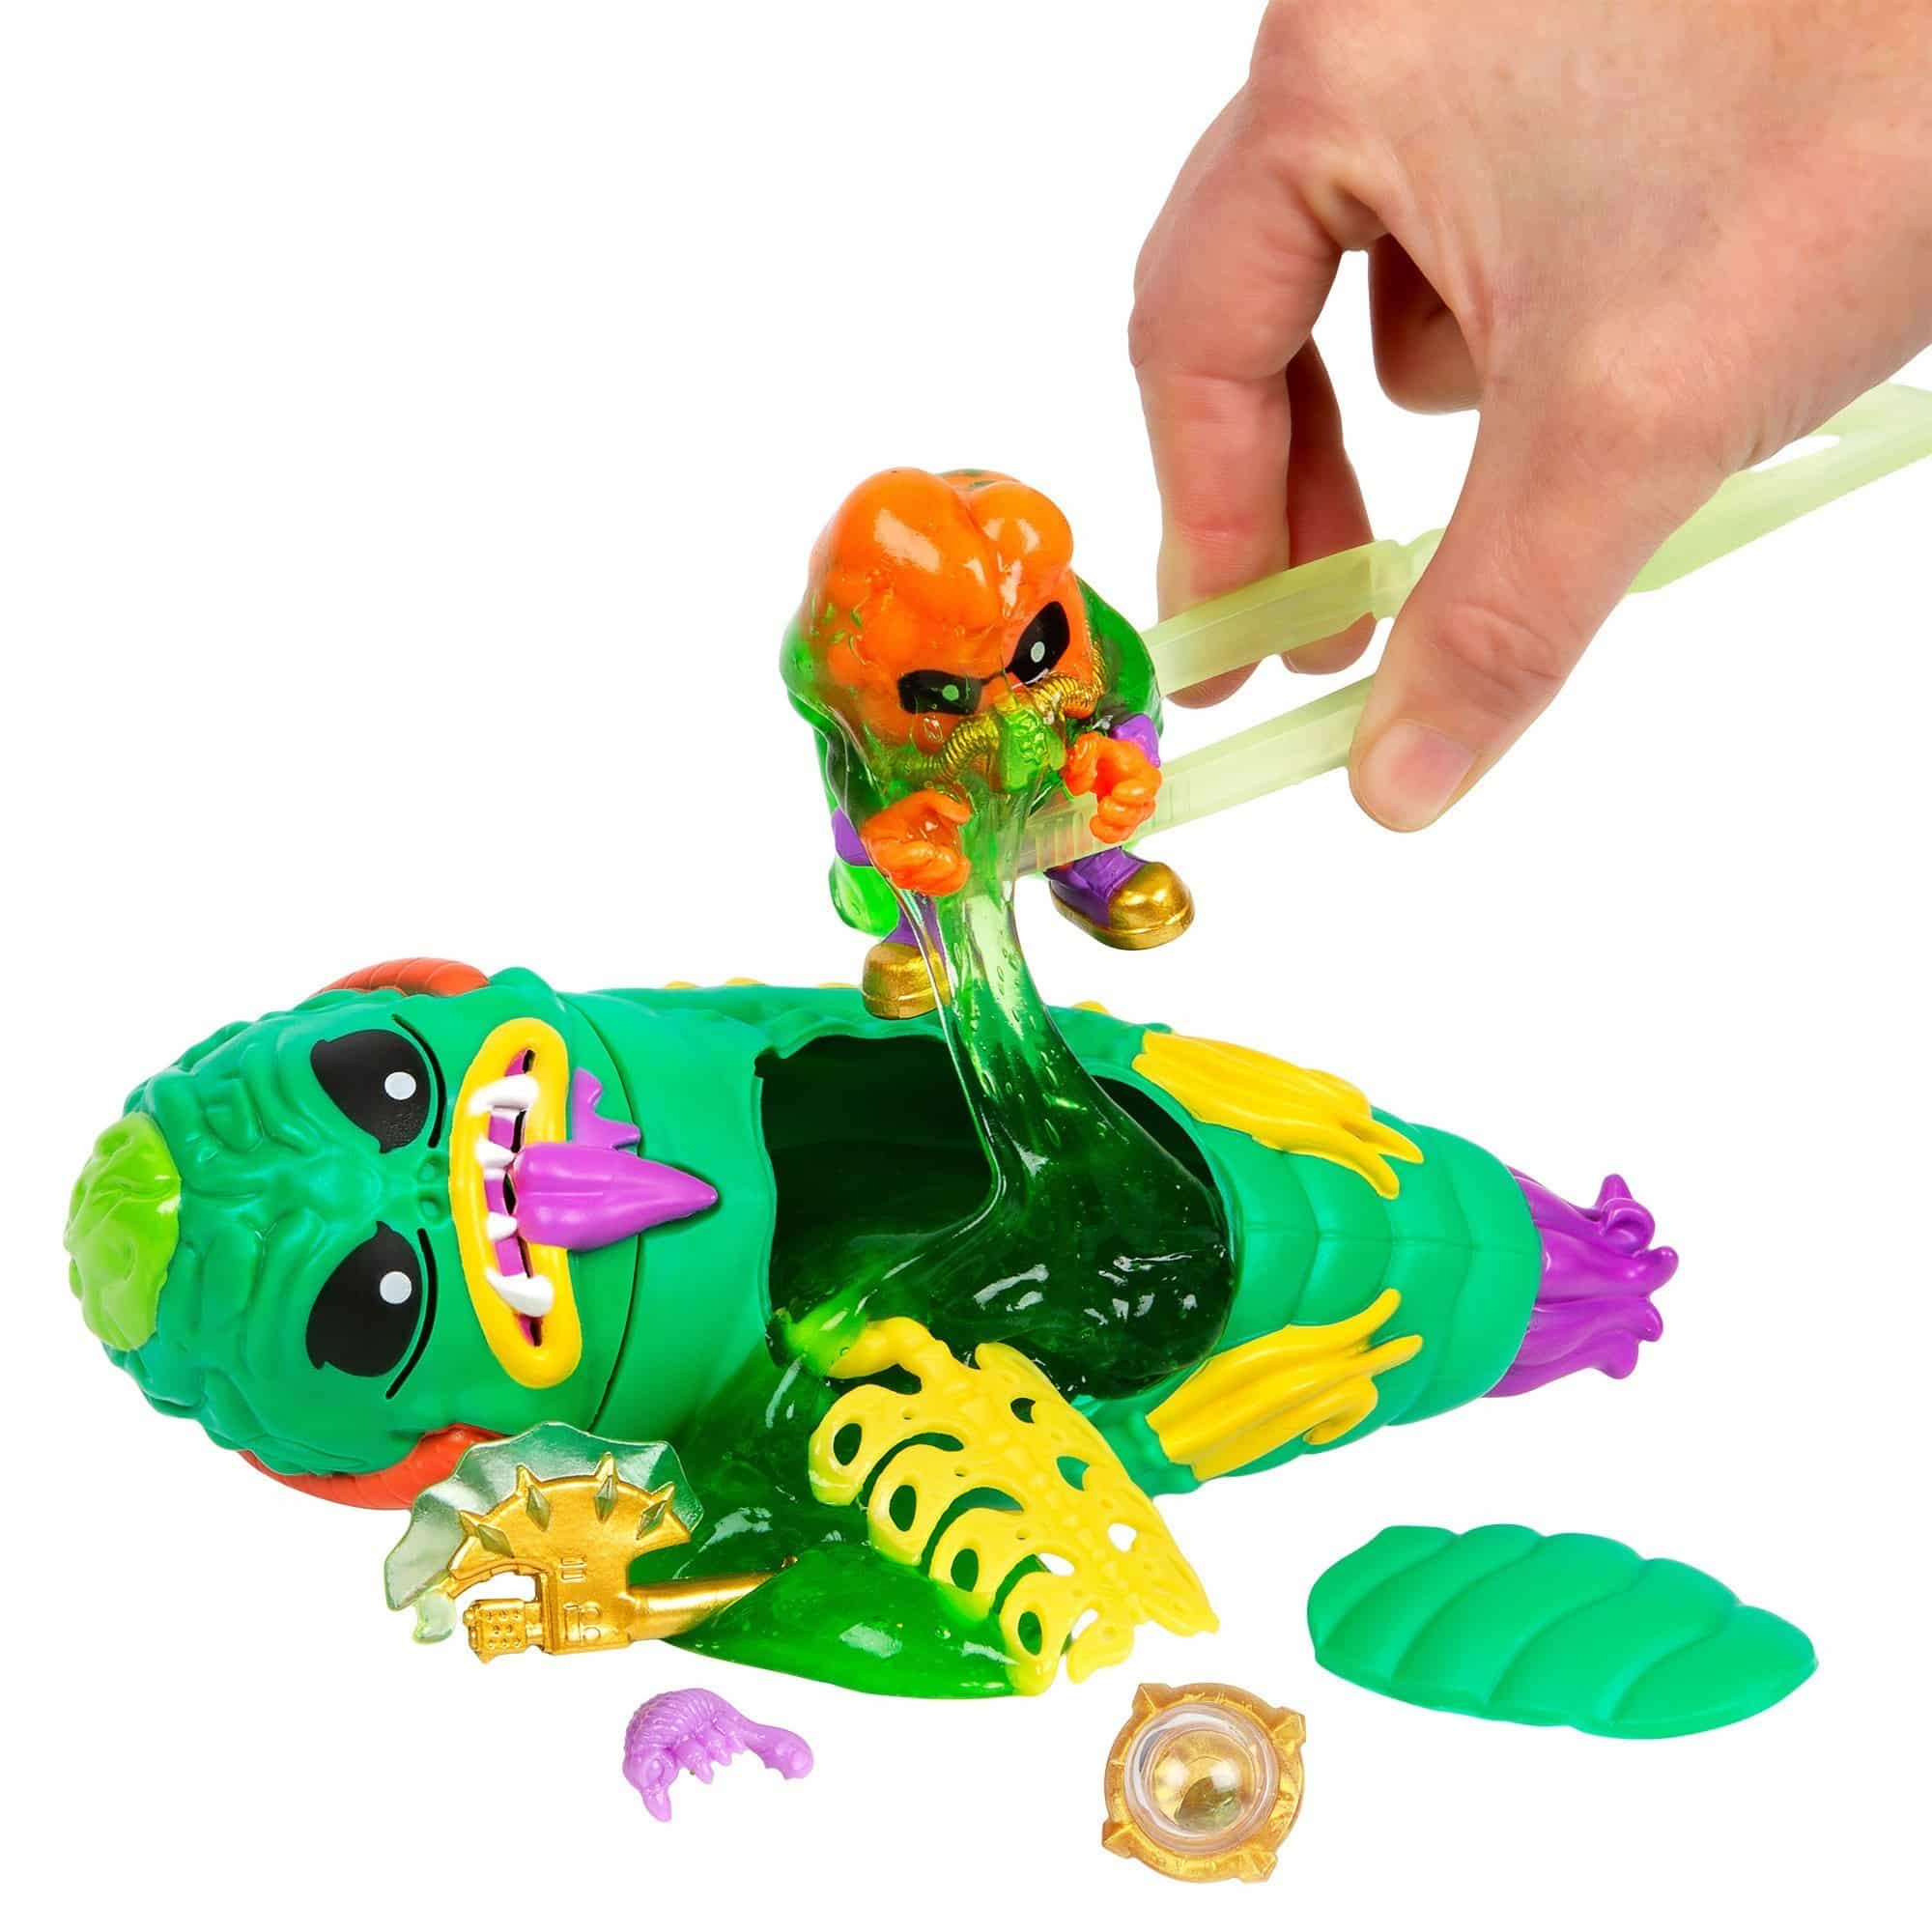  Treasure X Aliens - Dissection Kit with Slime, Action Figure,  and Treasure : Toys & Games